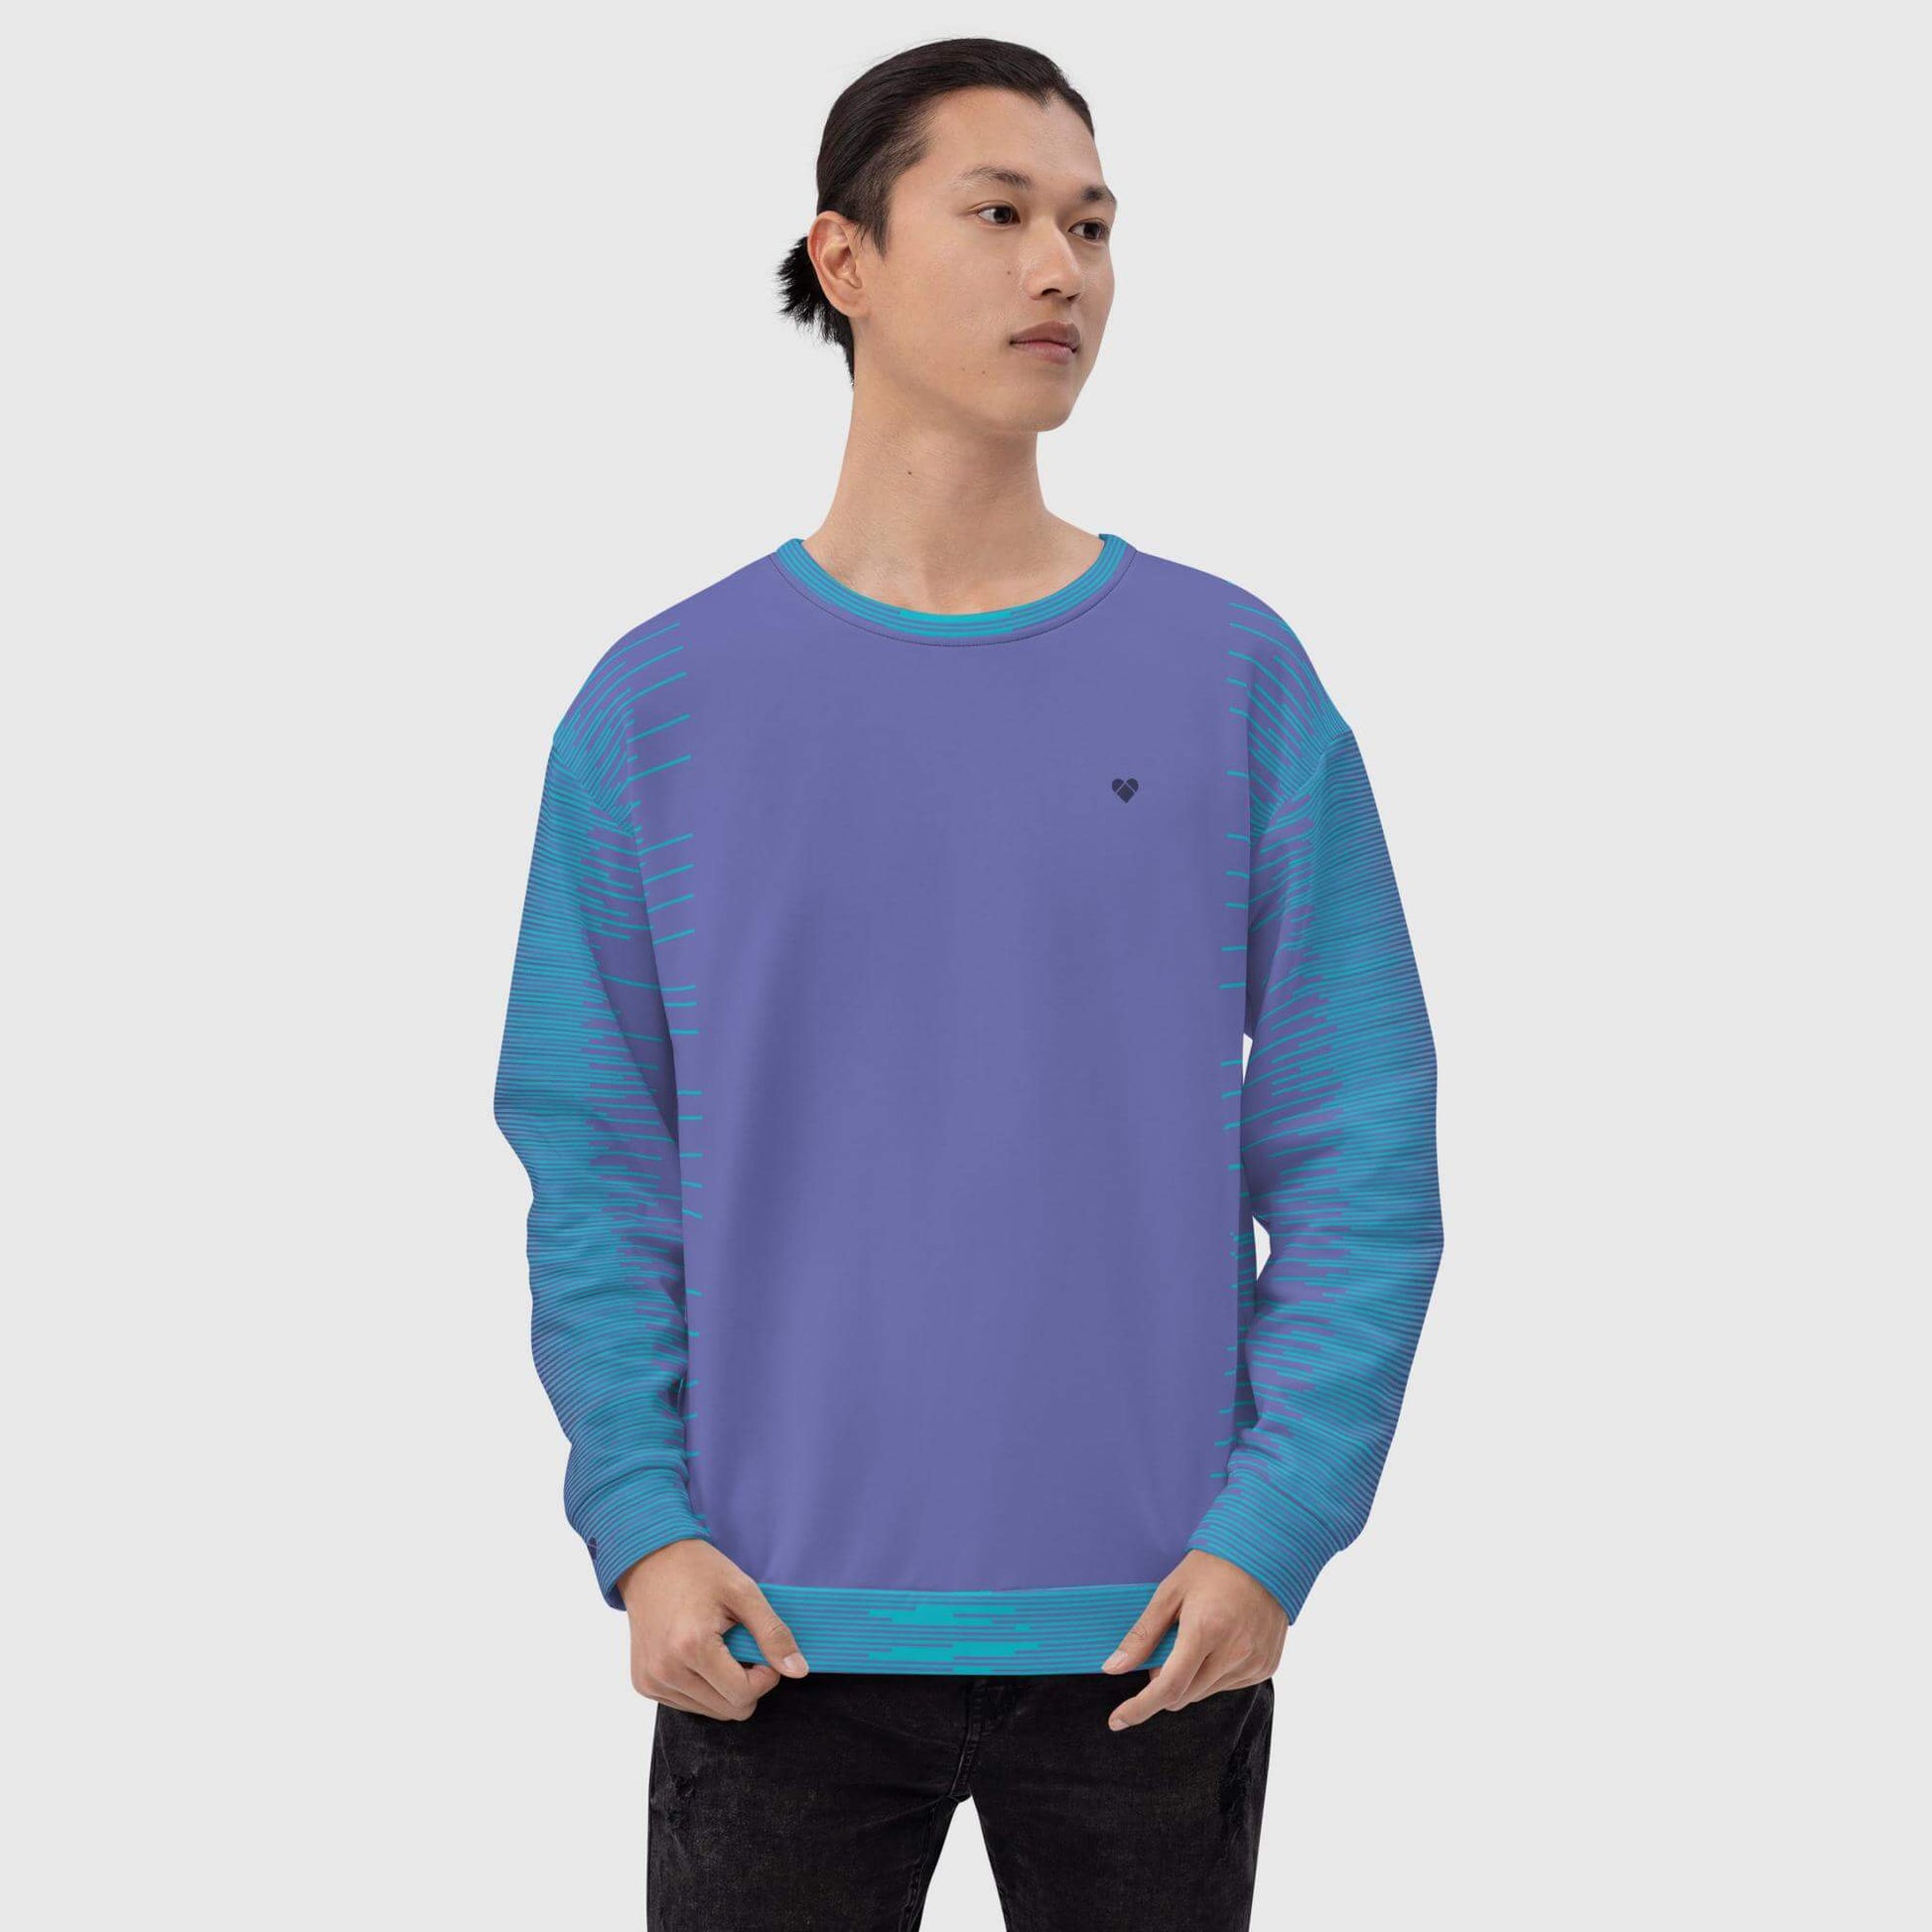 Periwinkle and Turquoise Sweatshirt - Amor Dual Collection